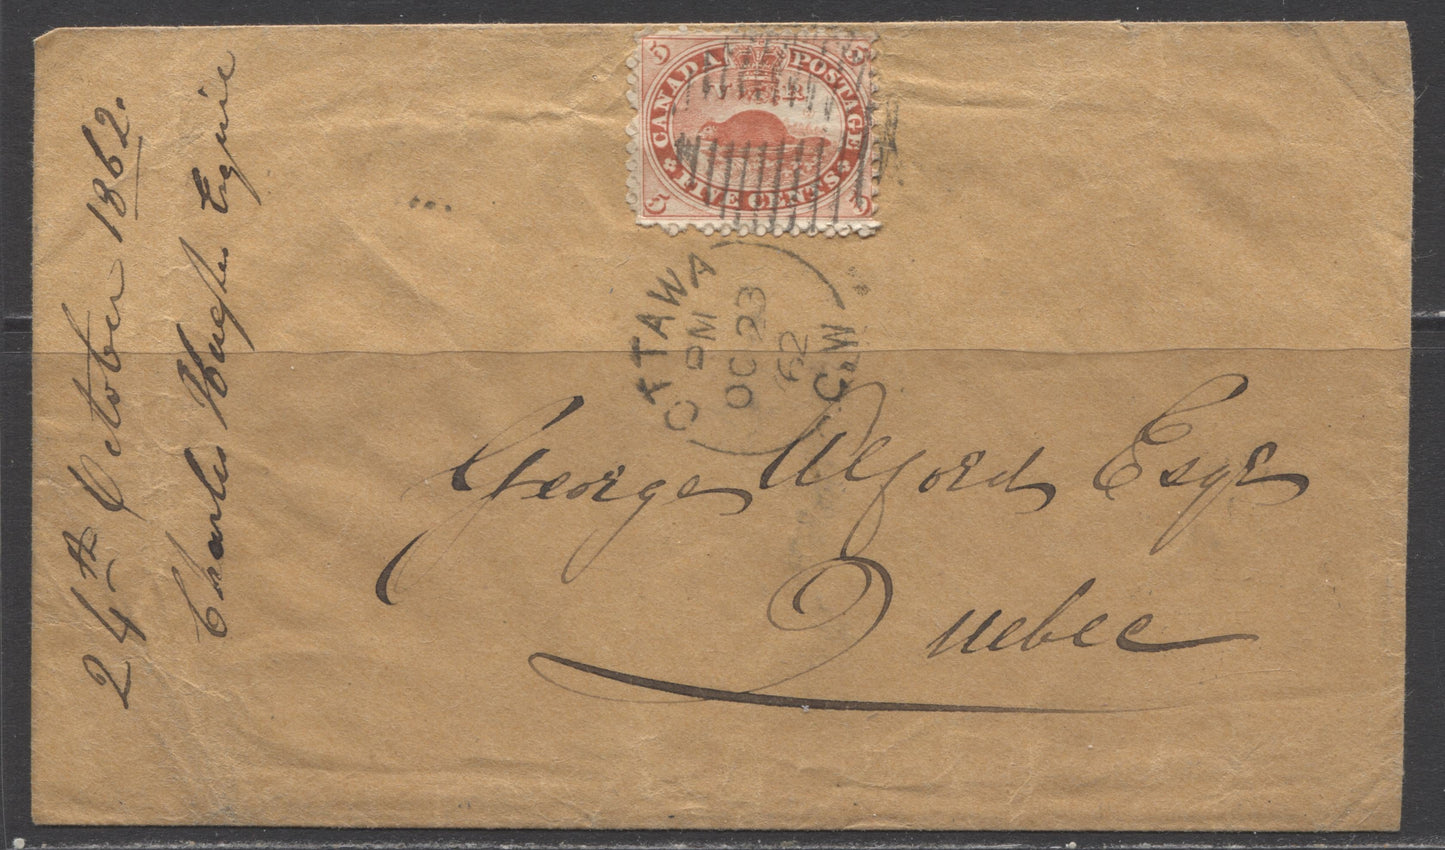 Lot 308 Canada #15ii 5c Orange Red, Beaver, 1859-1867 First Cents Issue, Single Usage of Perf. 12 x 11.75 on October 23, 1863 Cover to Quebec, Nice Penmanship